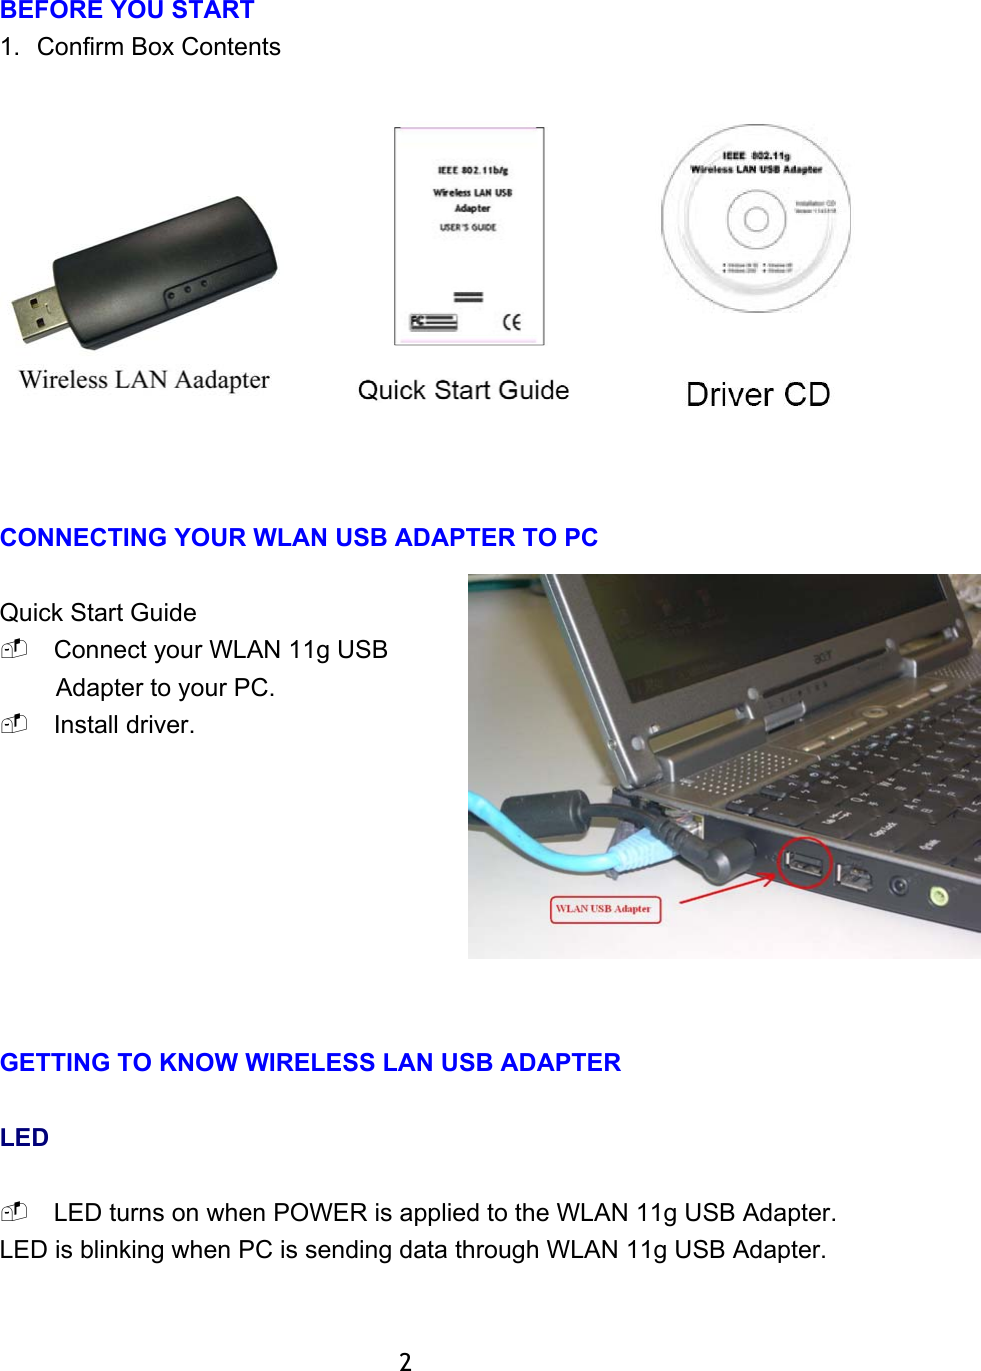  BEFORE YOU START 1.  Confirm Box Contents     CONNECTING YOUR WLAN USB ADAPTER TO PC  Quick Start Guide  Connect your WLAN 11g USB Adapter to your PC.  Install driver.         GETTING TO KNOW WIRELESS LAN USB ADAPTER  LED   LED turns on when POWER is applied to the WLAN 11g USB Adapter. LED is blinking when PC is sending data through WLAN 11g USB Adapter.           2 